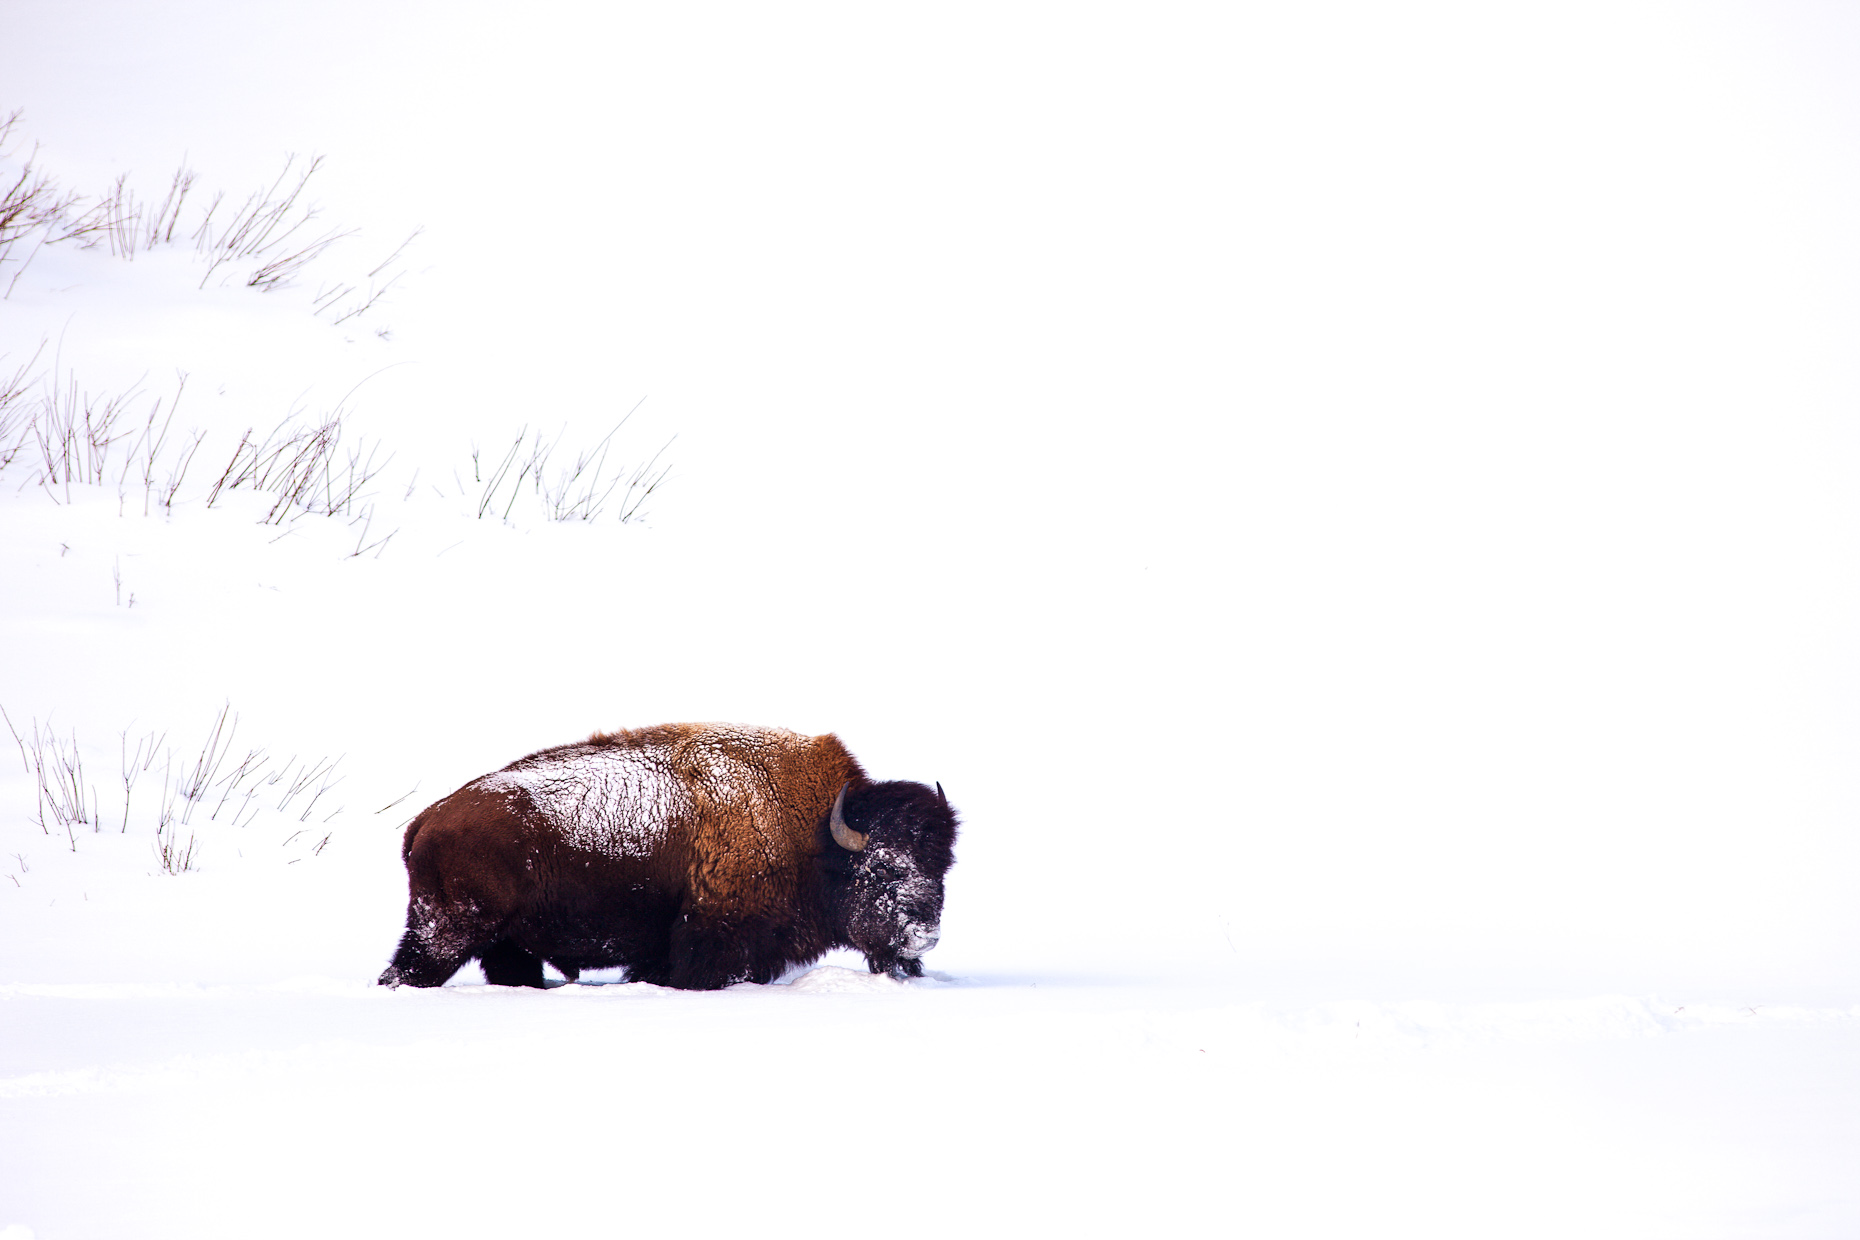 bison in snow Yellowstone